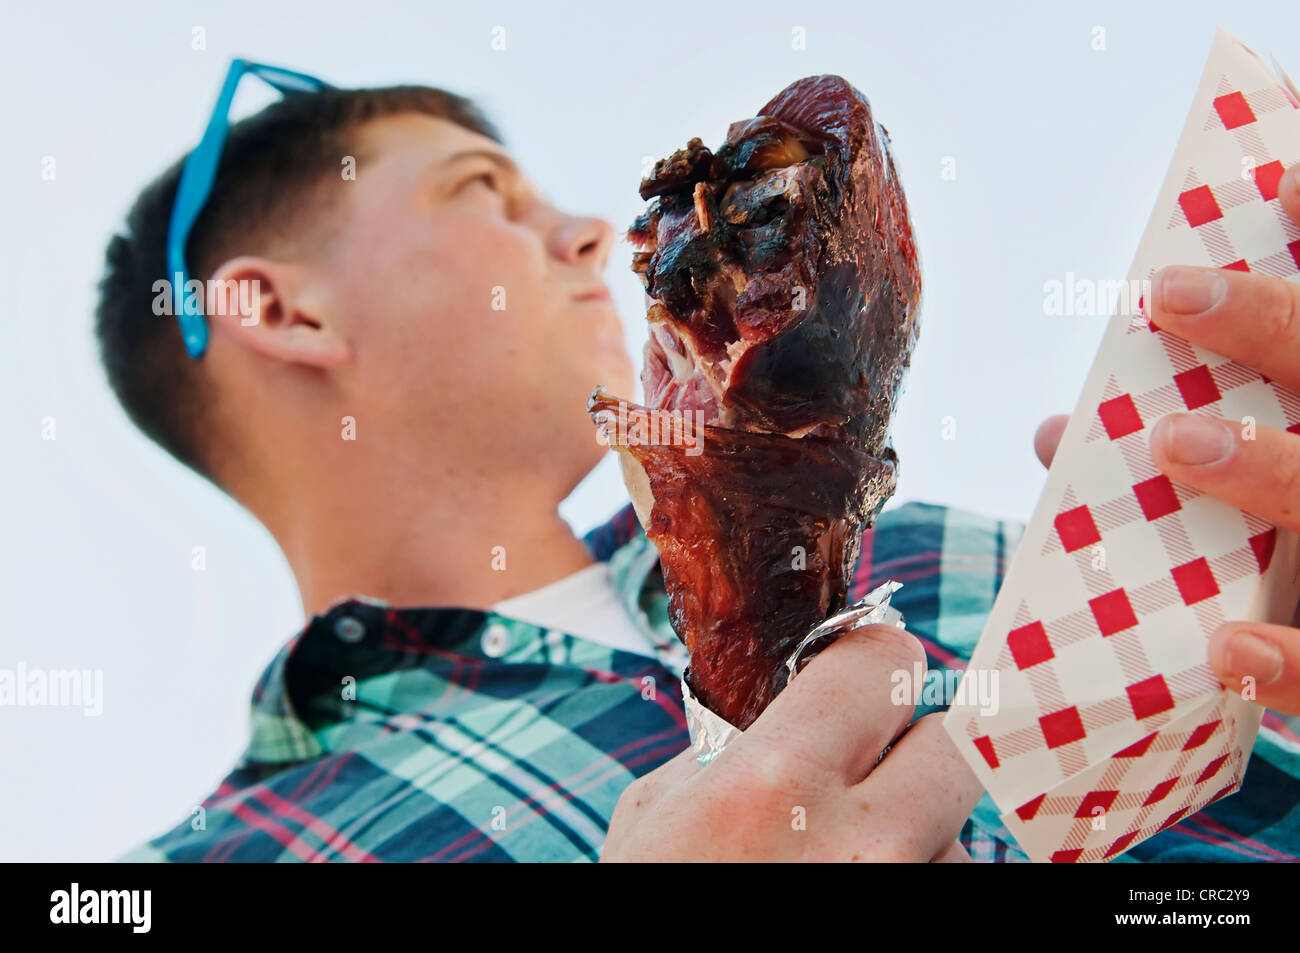 Closeup of theme park giant barbecued turkey drumstick held by a young adult male. Stock Photo